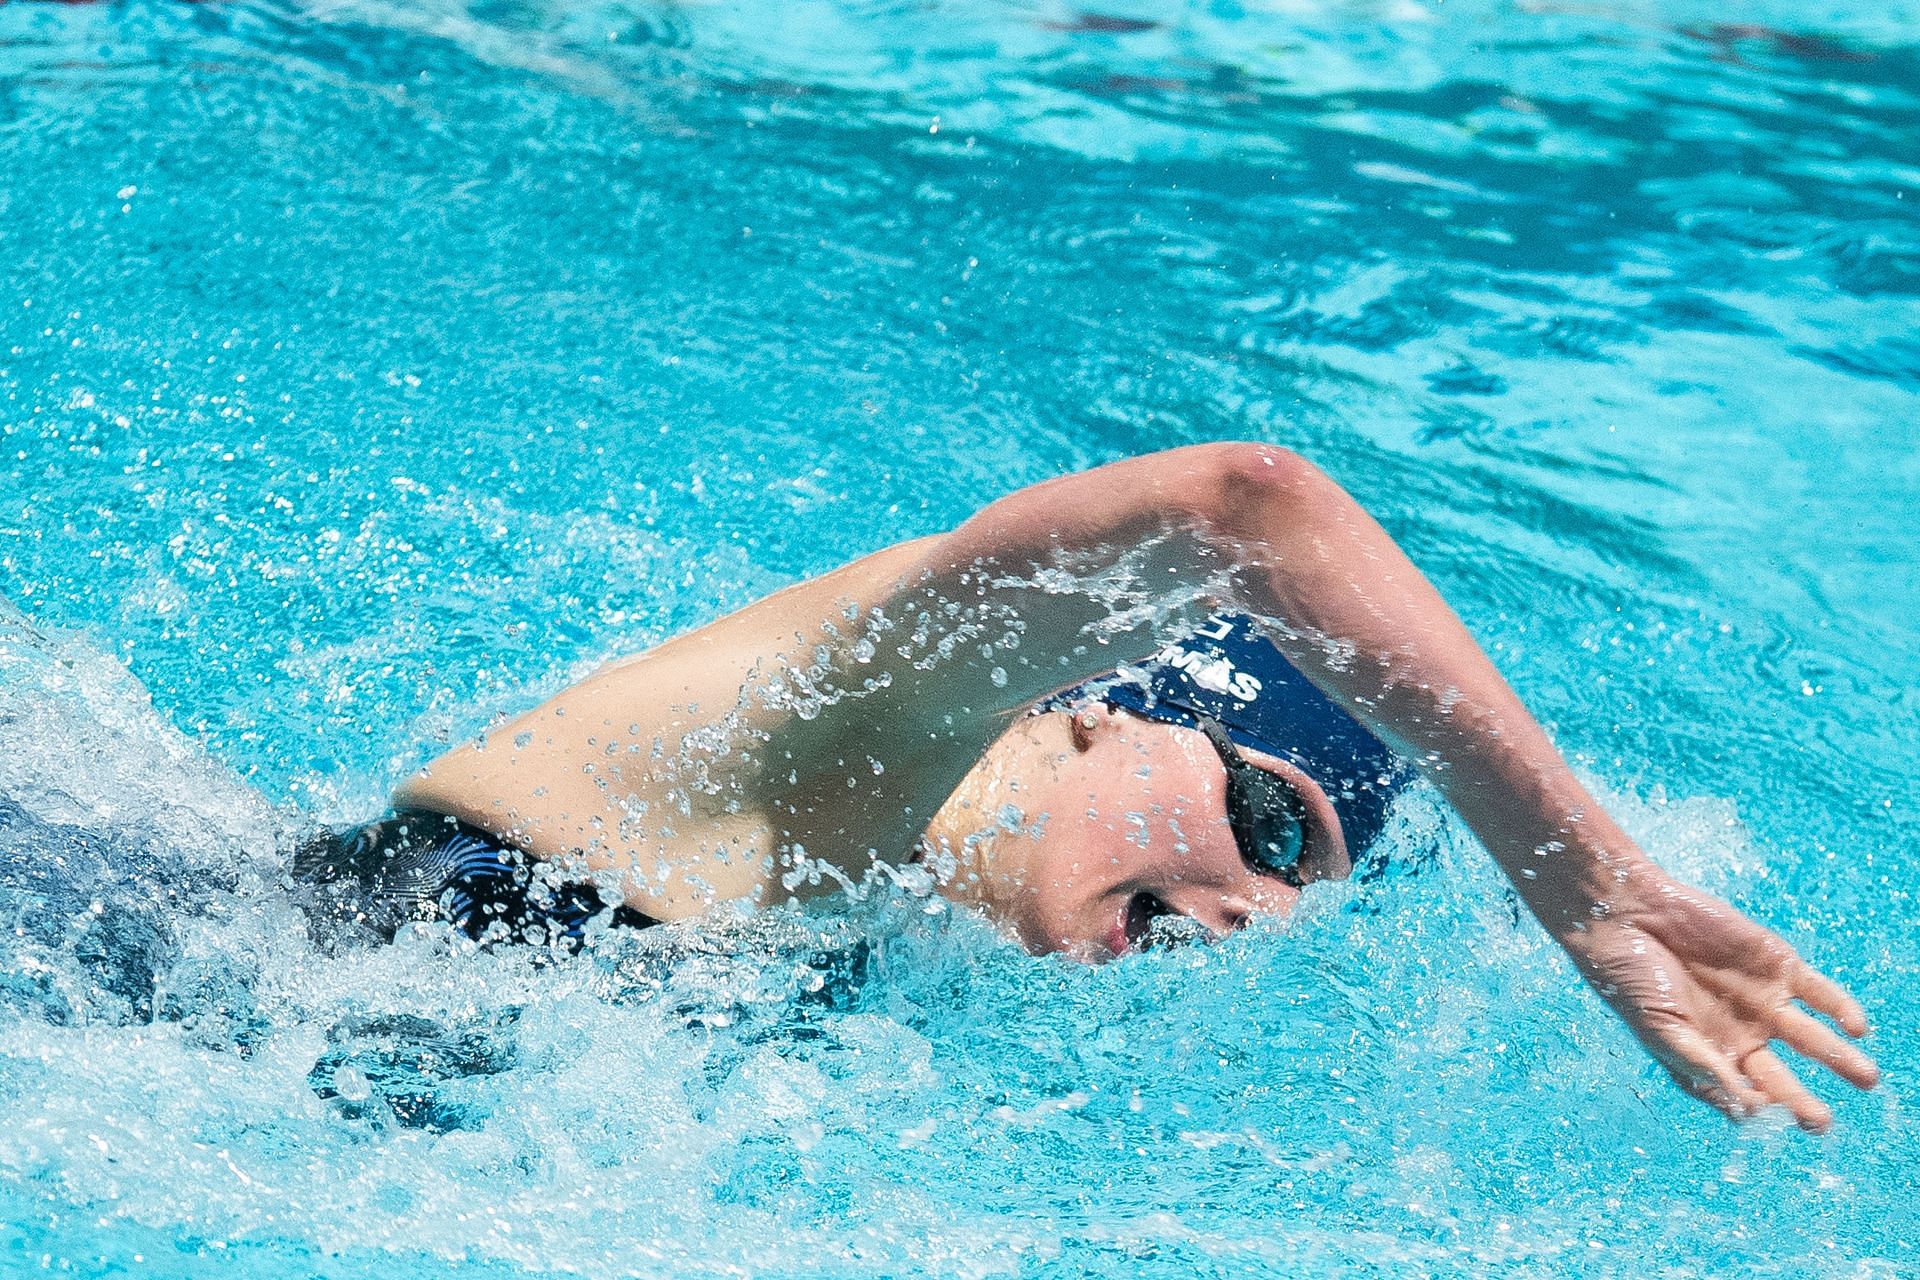 University of Pennsylvania swimmer Lia Thomas swims the 500 freestyle (Photo by Kathryn Riley/Getty Images)